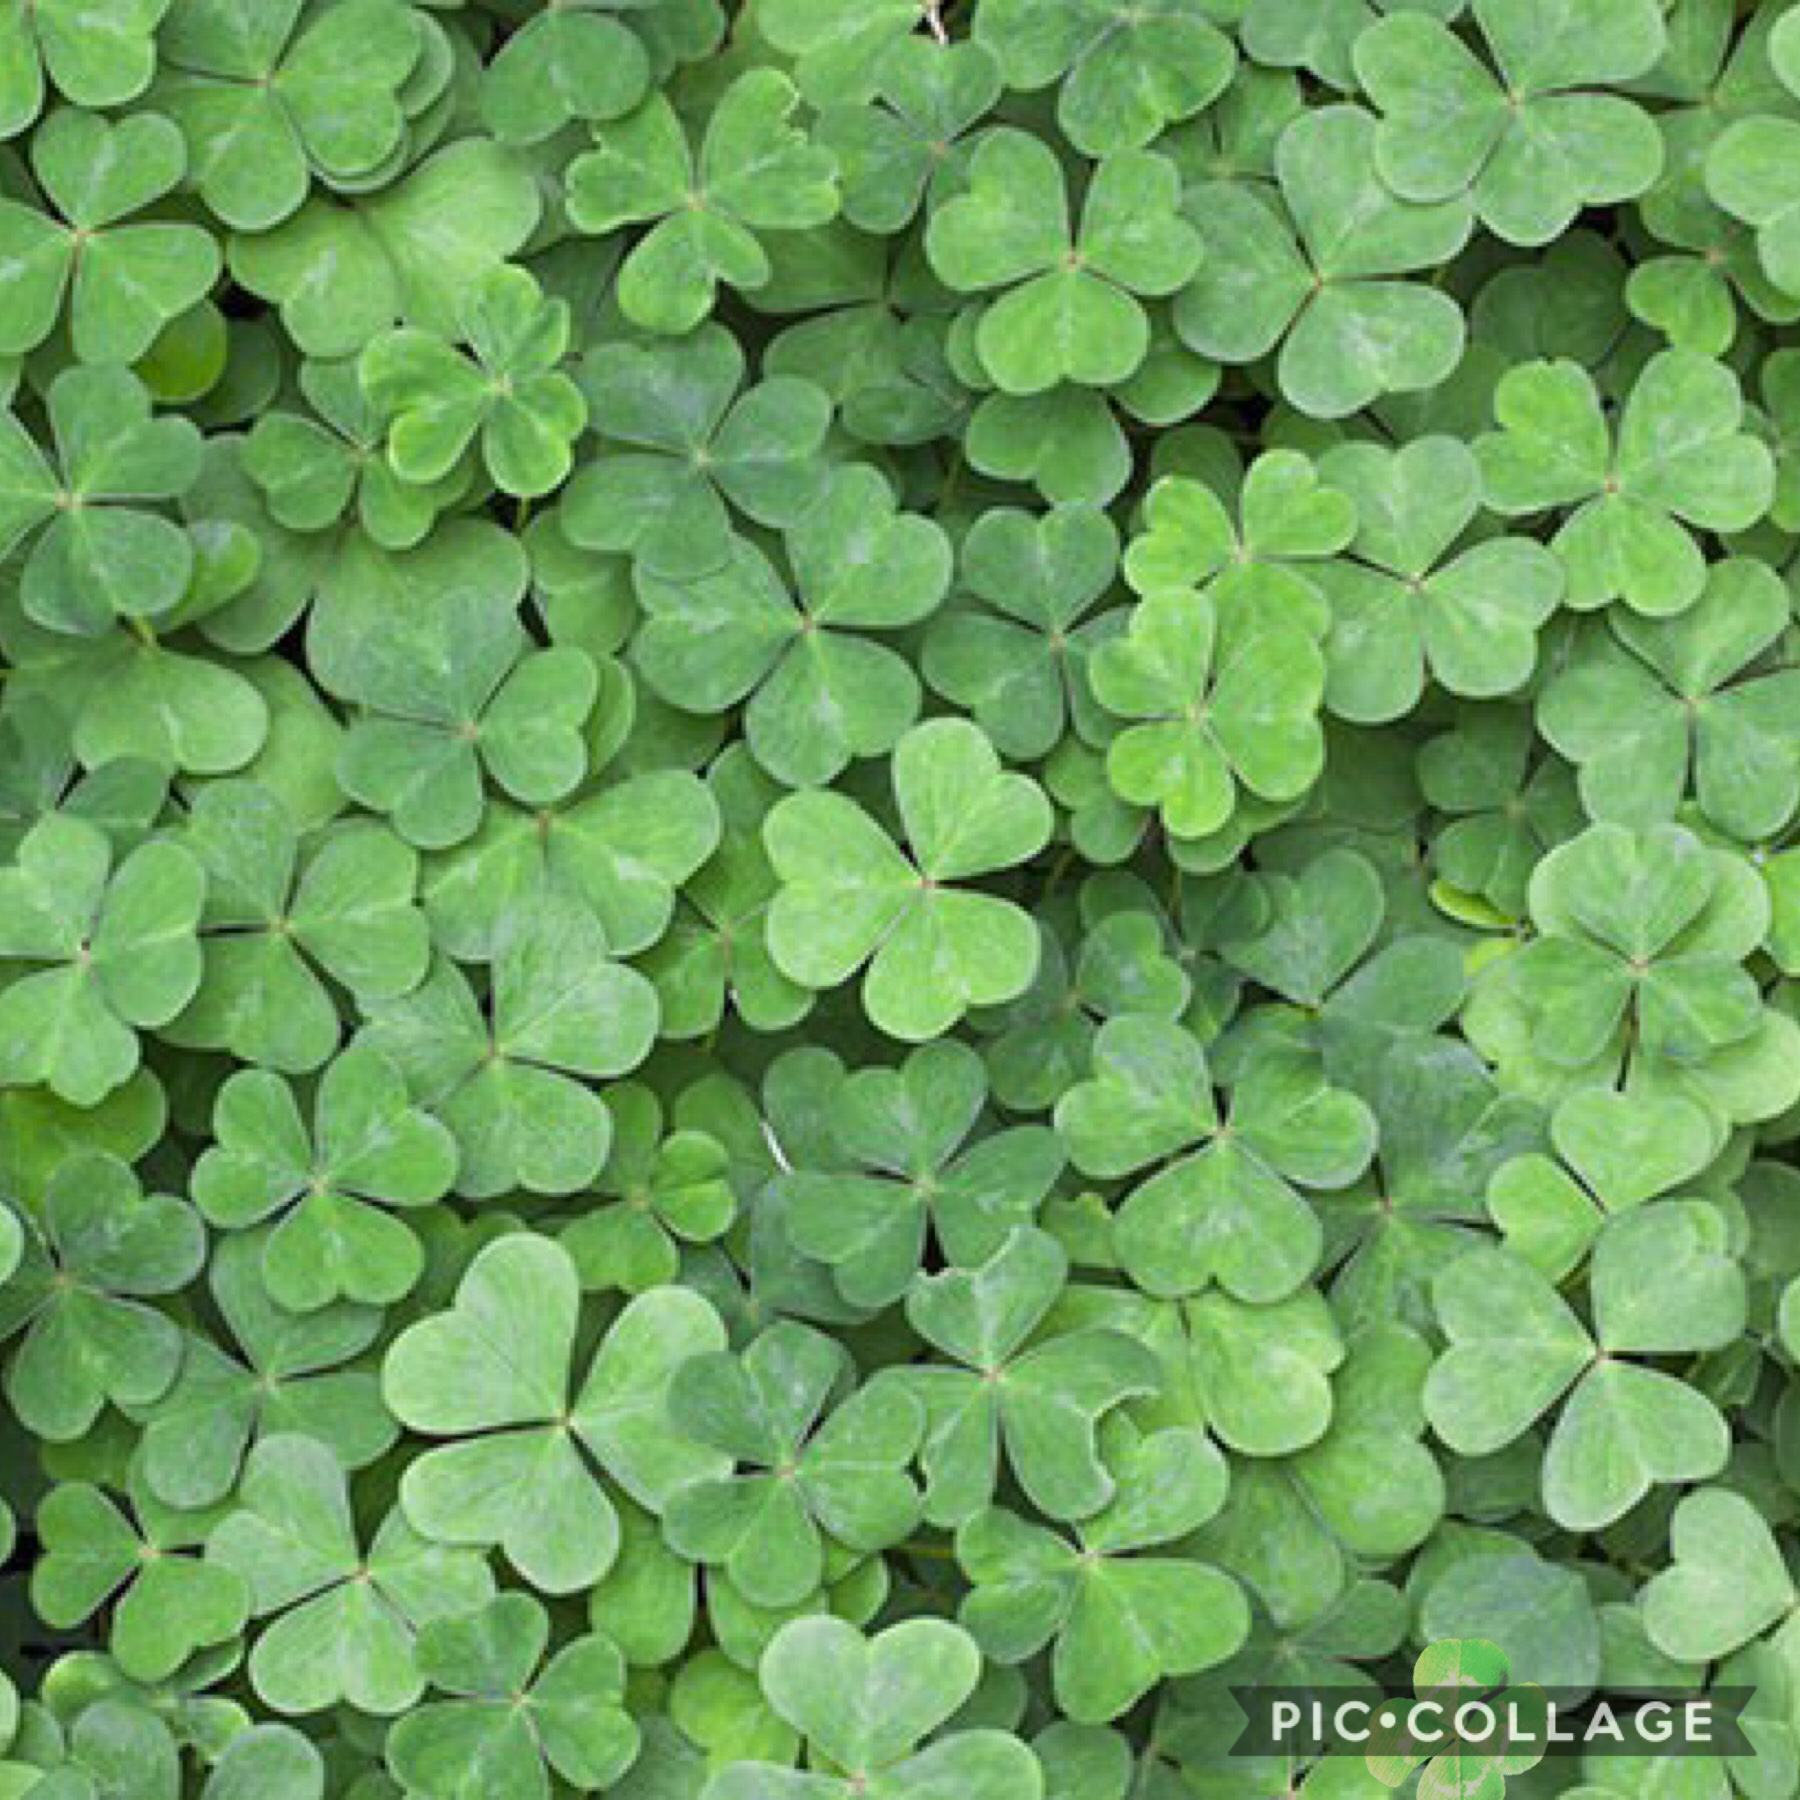 Find the four leaf clover comment if you found it NO CHEATING!